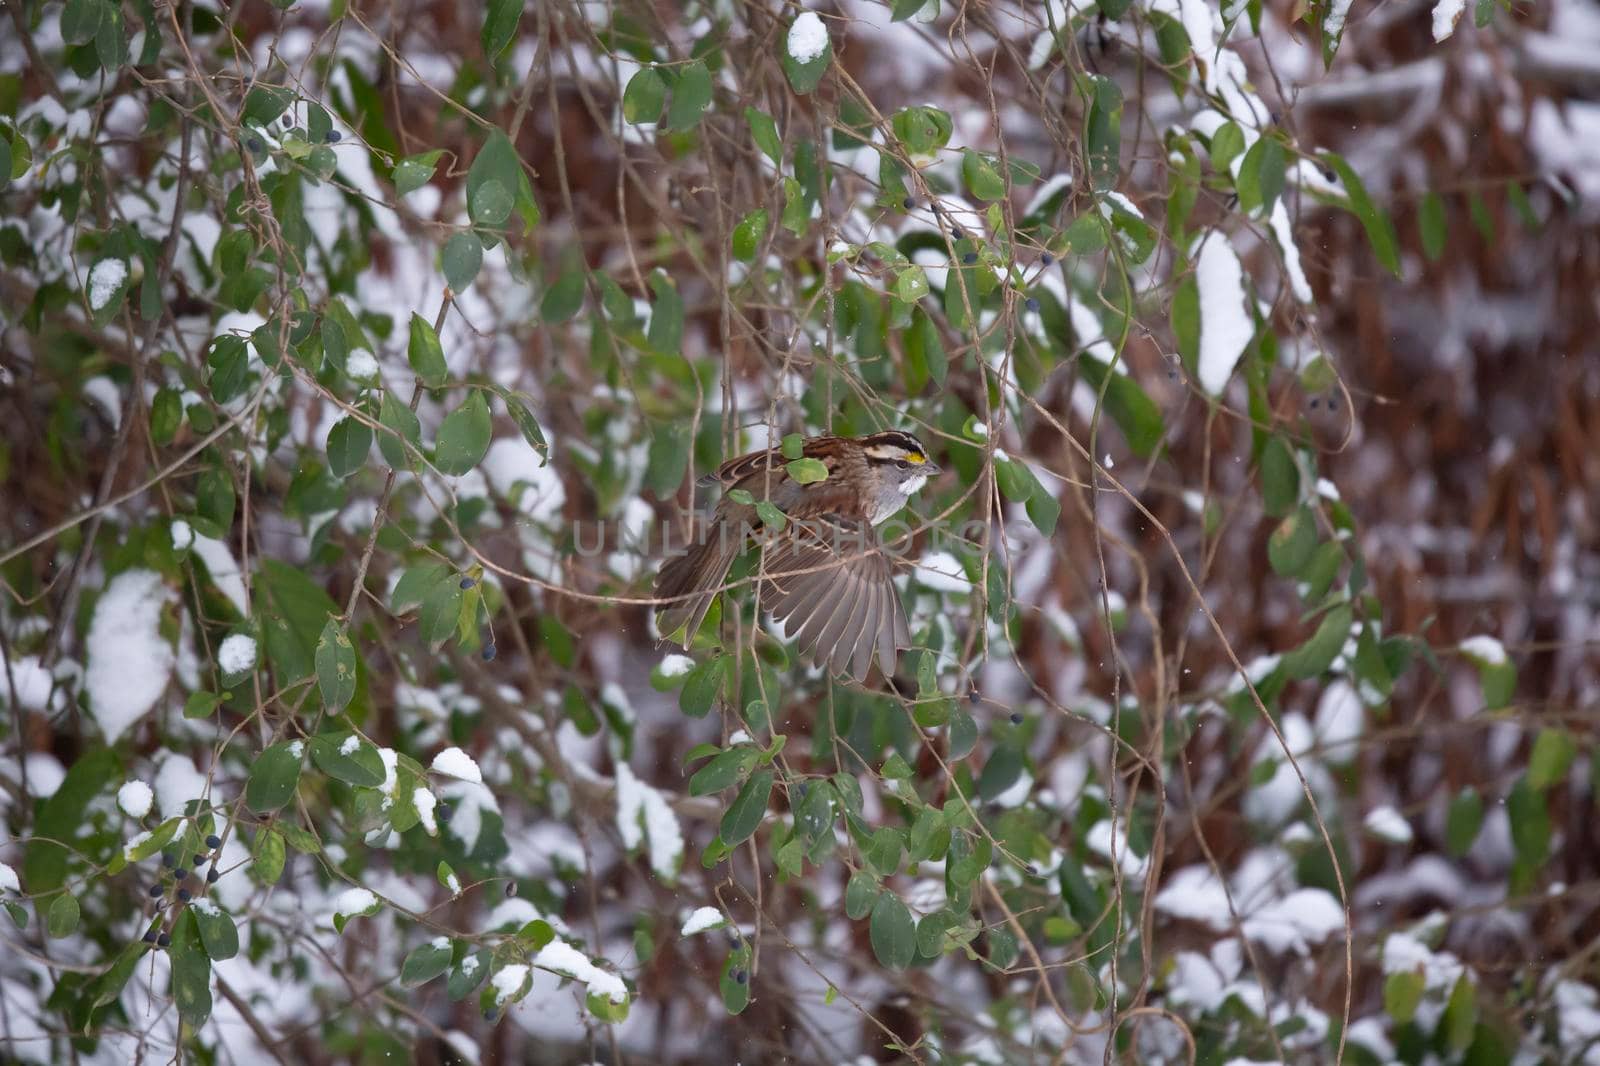 White-throated sparrow (Zonotrichia albicollis) hopping from one perch on a bush to another during a windy snow storm